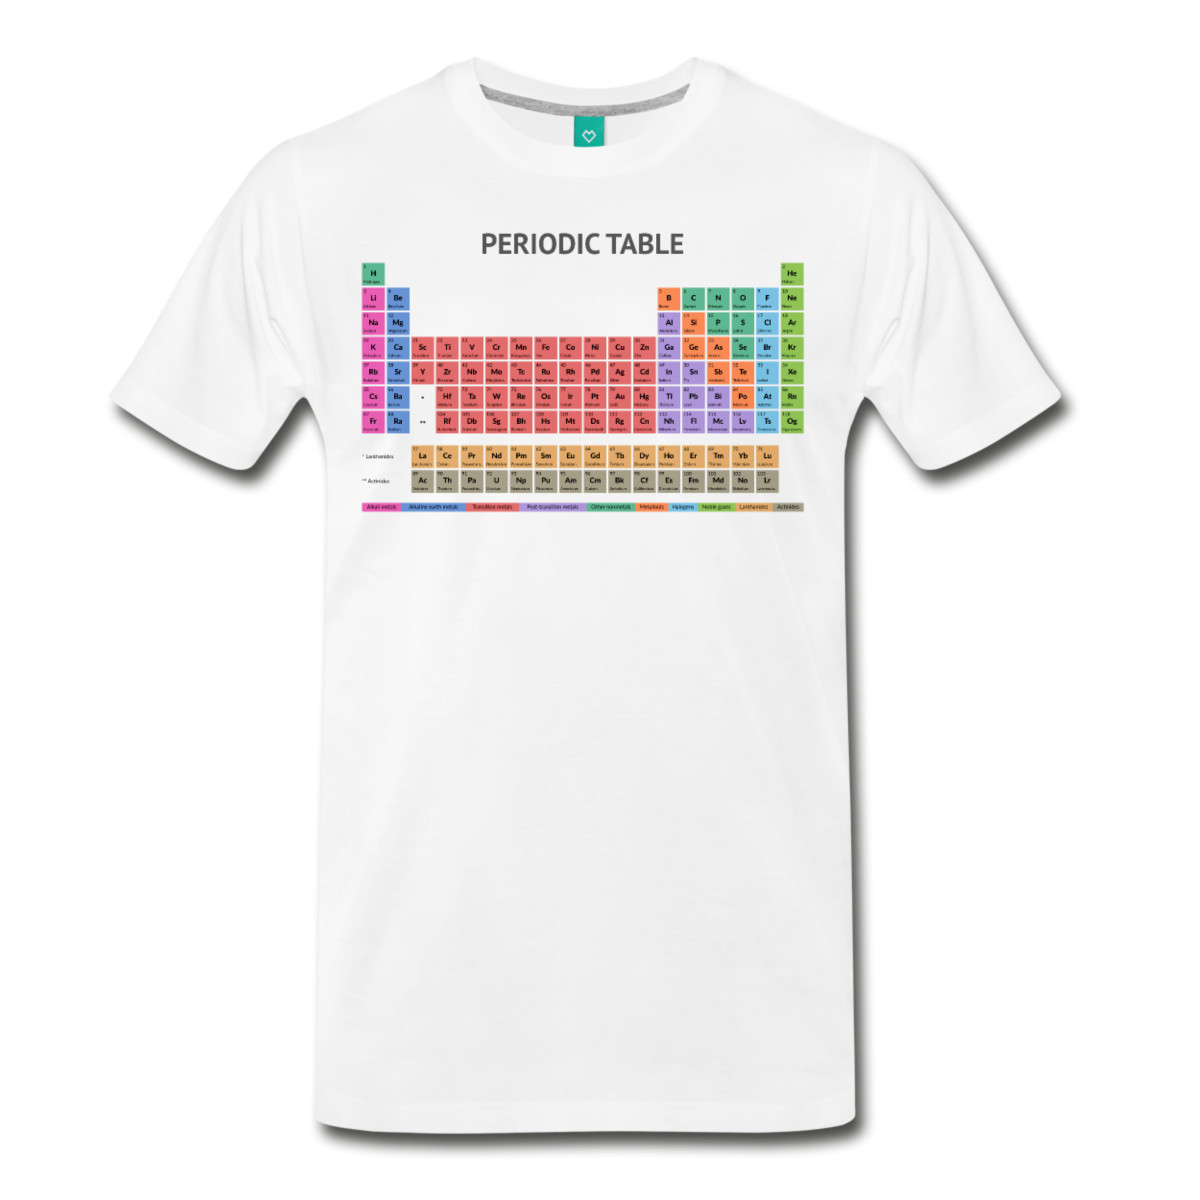 Periodic table t-shirt in light background